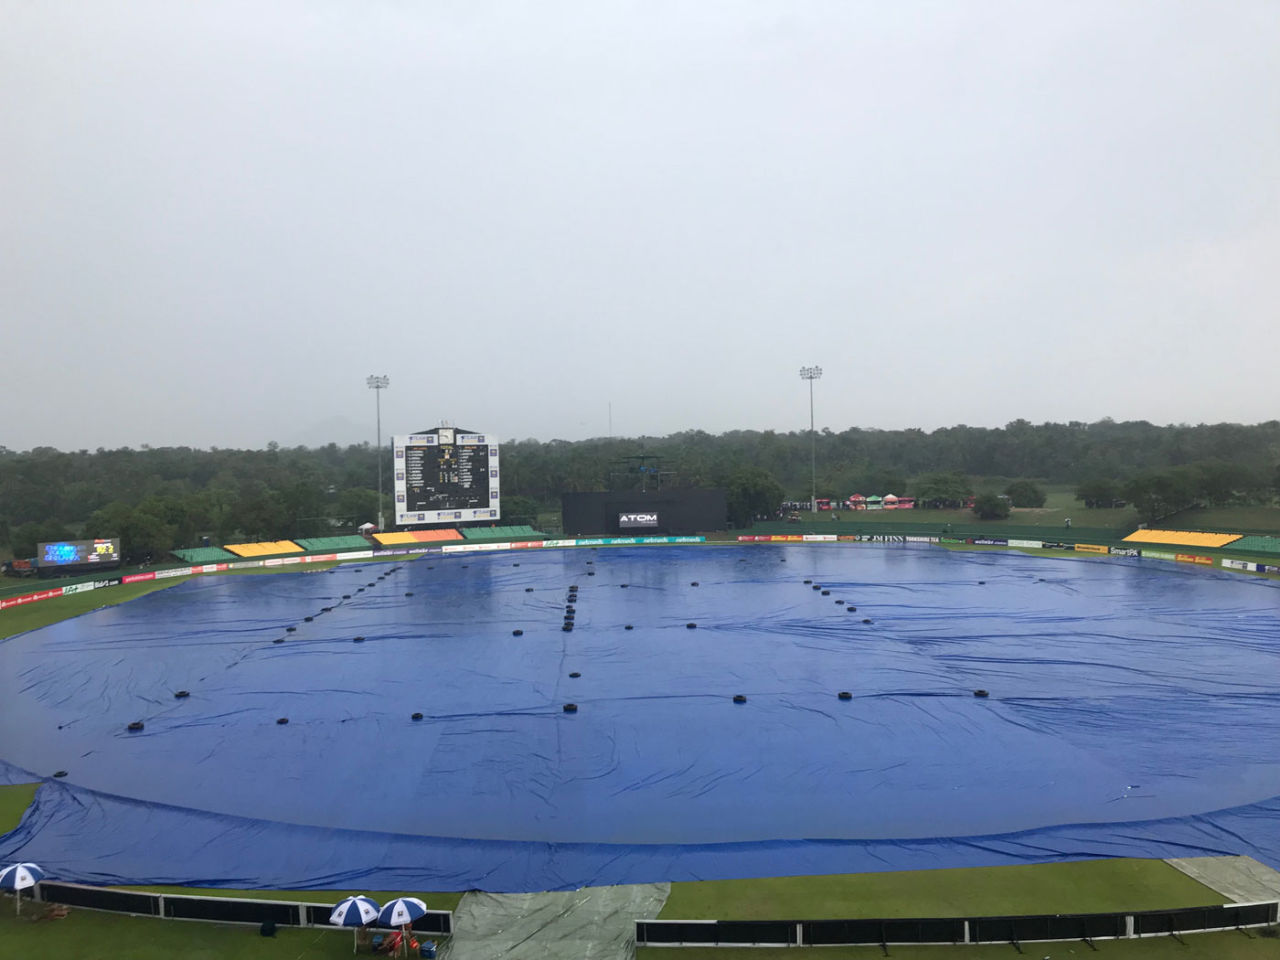 The playing surface was fully under wraps when the rain arrived, Sri Lanka v England, 1st ODI, Dambulla, October 10, 2018